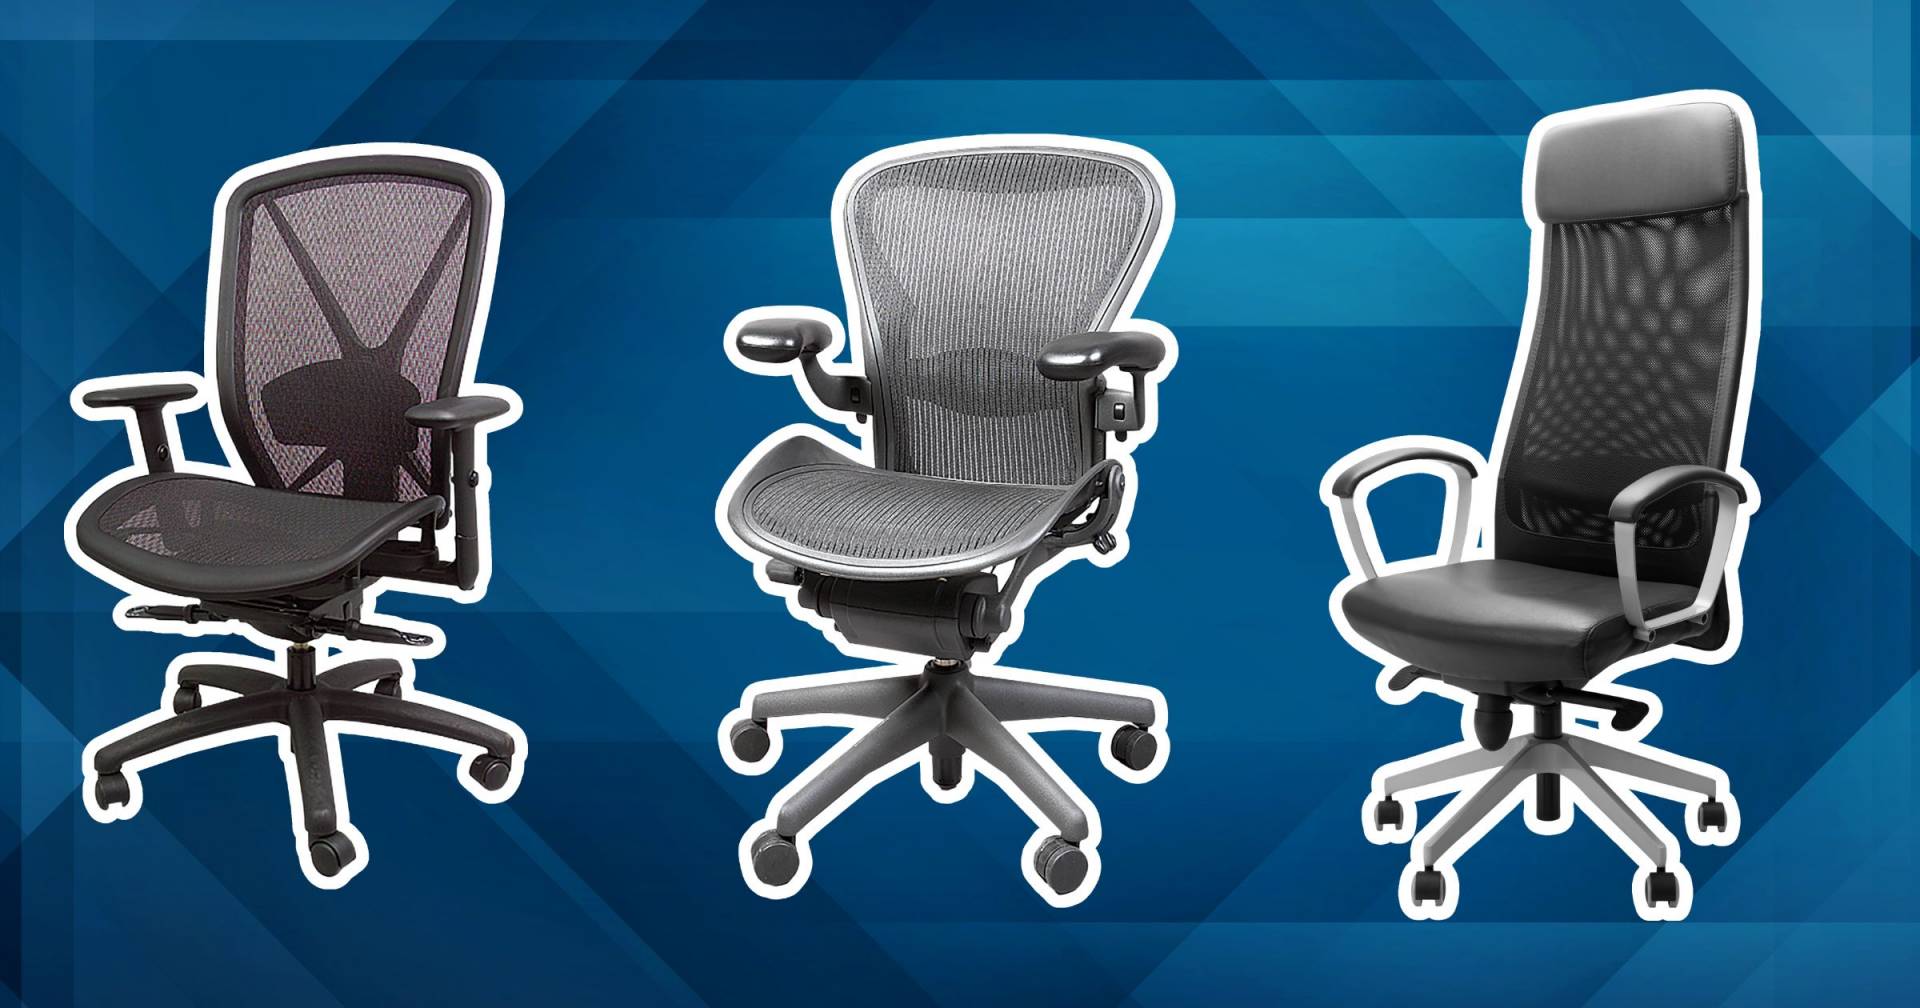 Best Counter Height Office Chair 1682182028 1920 60 